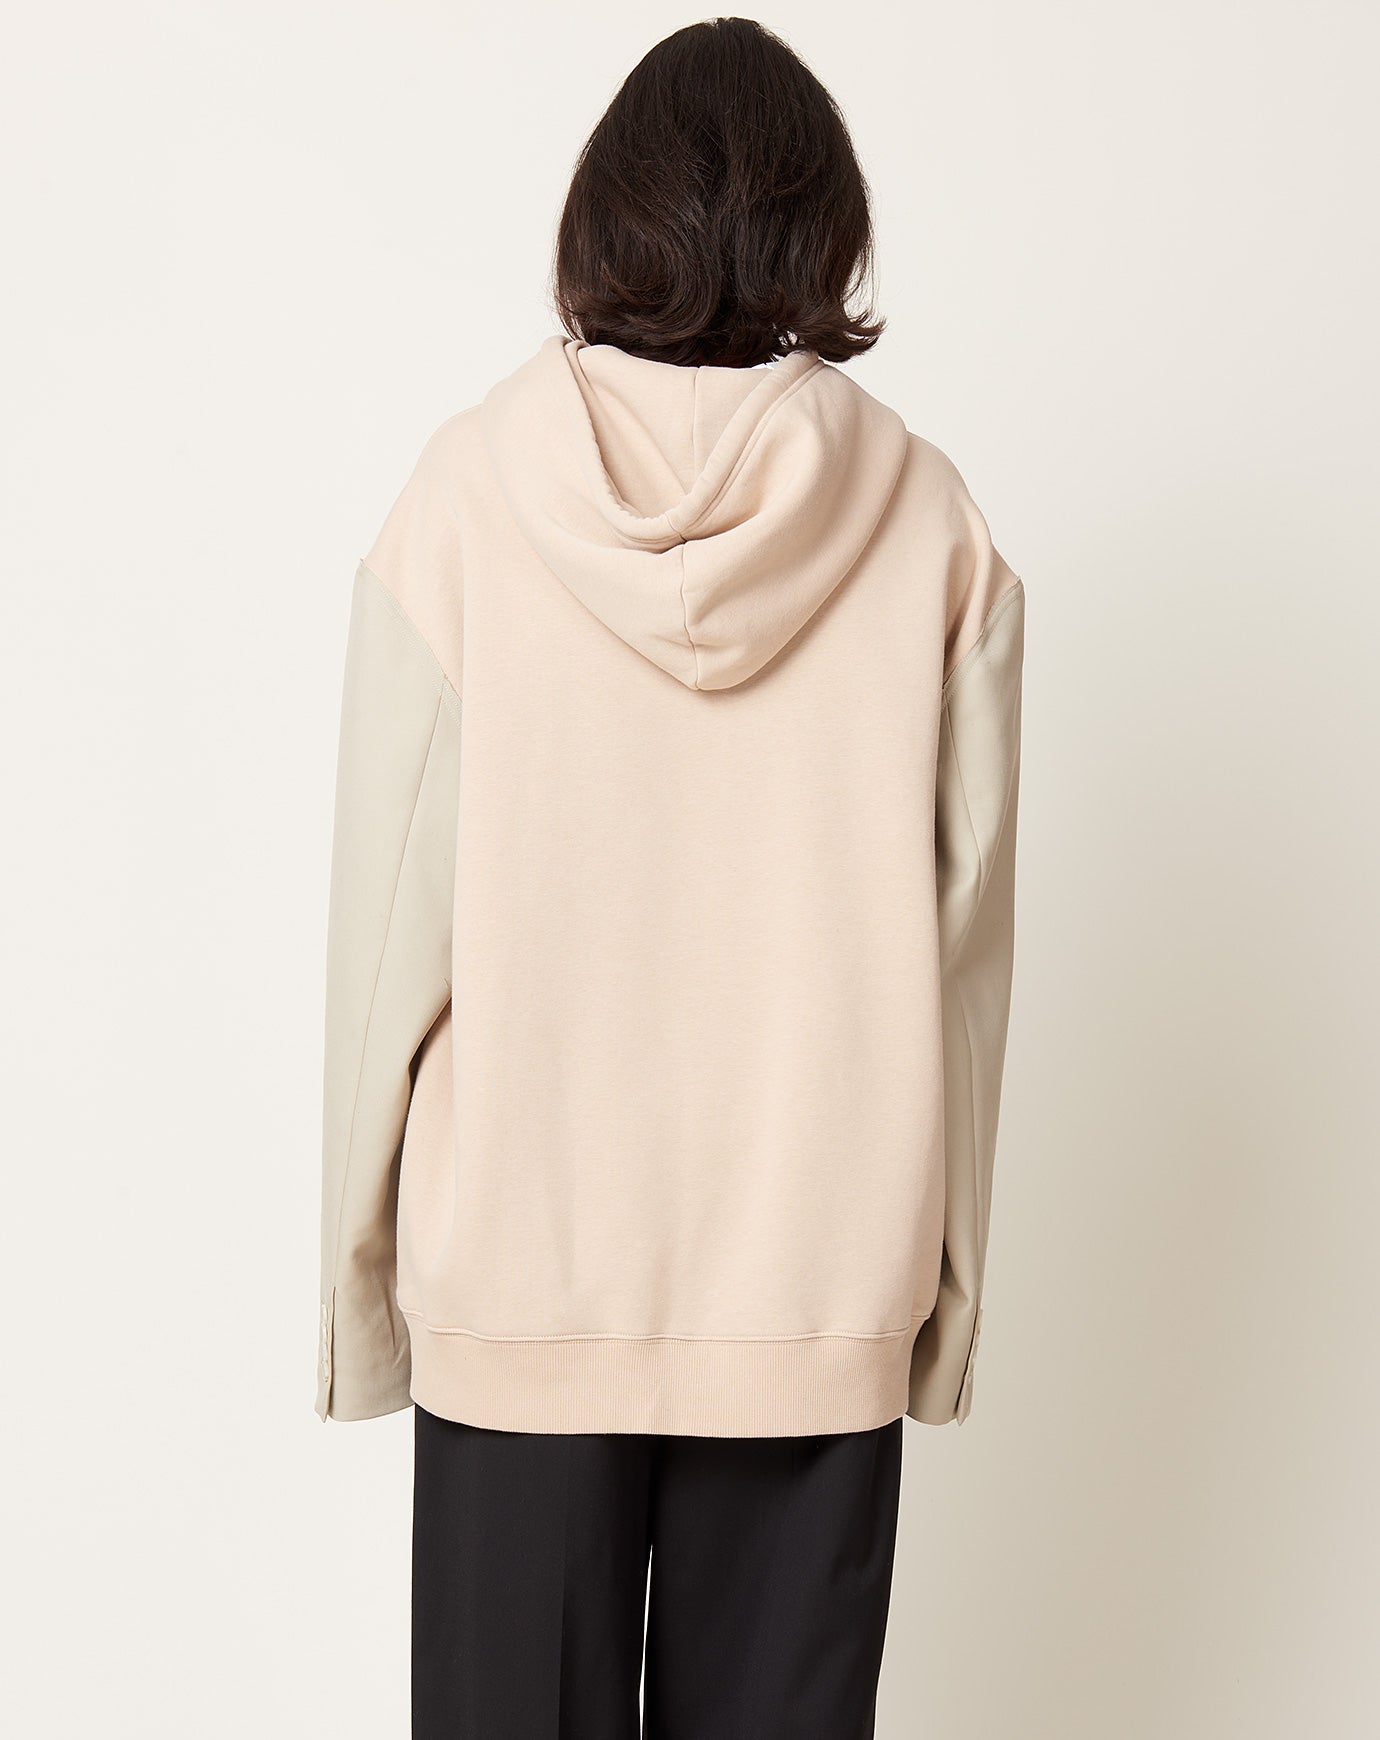 MM6 Sweatshirt with Suit Sleeves in Beige and Stone